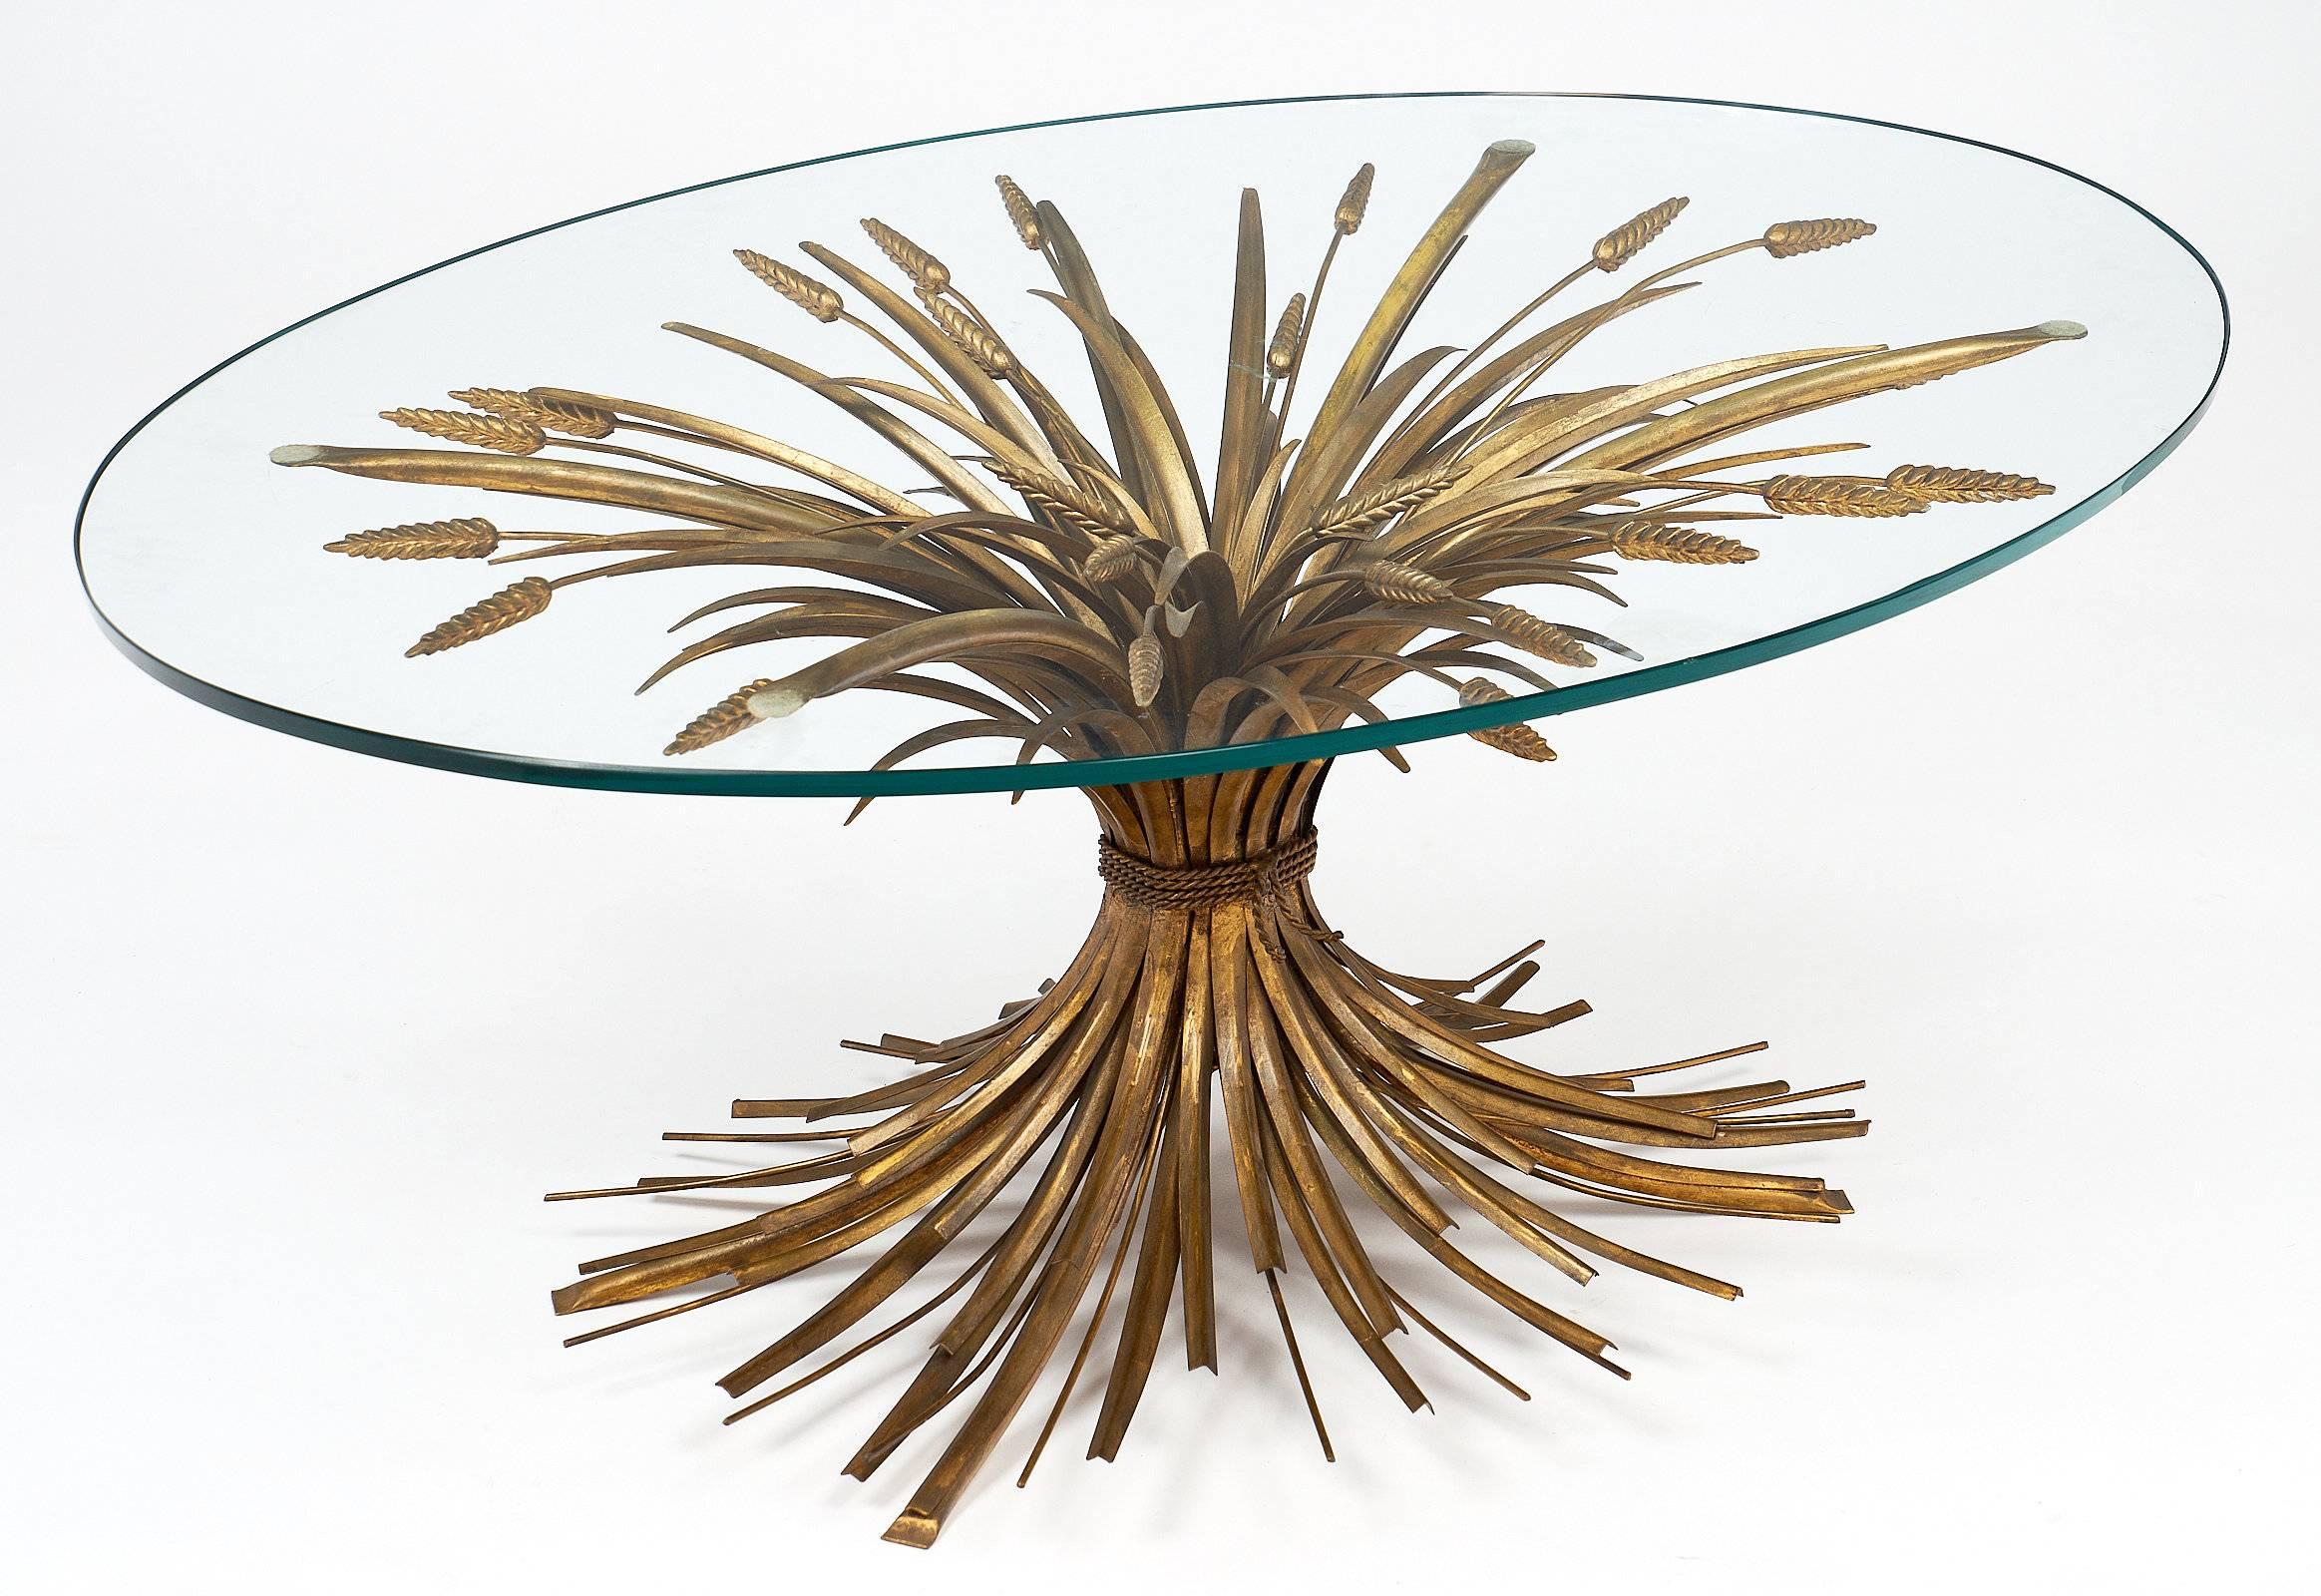 Vintage French Maison Baguès “sheaf of wheat” coffee table with a gold leafed brass base and an oval glass top. Historically, Salvador Dali gave Coco Chanel a similar table for her Paris apartment on Rue Cambon. The design is now a classic, highly